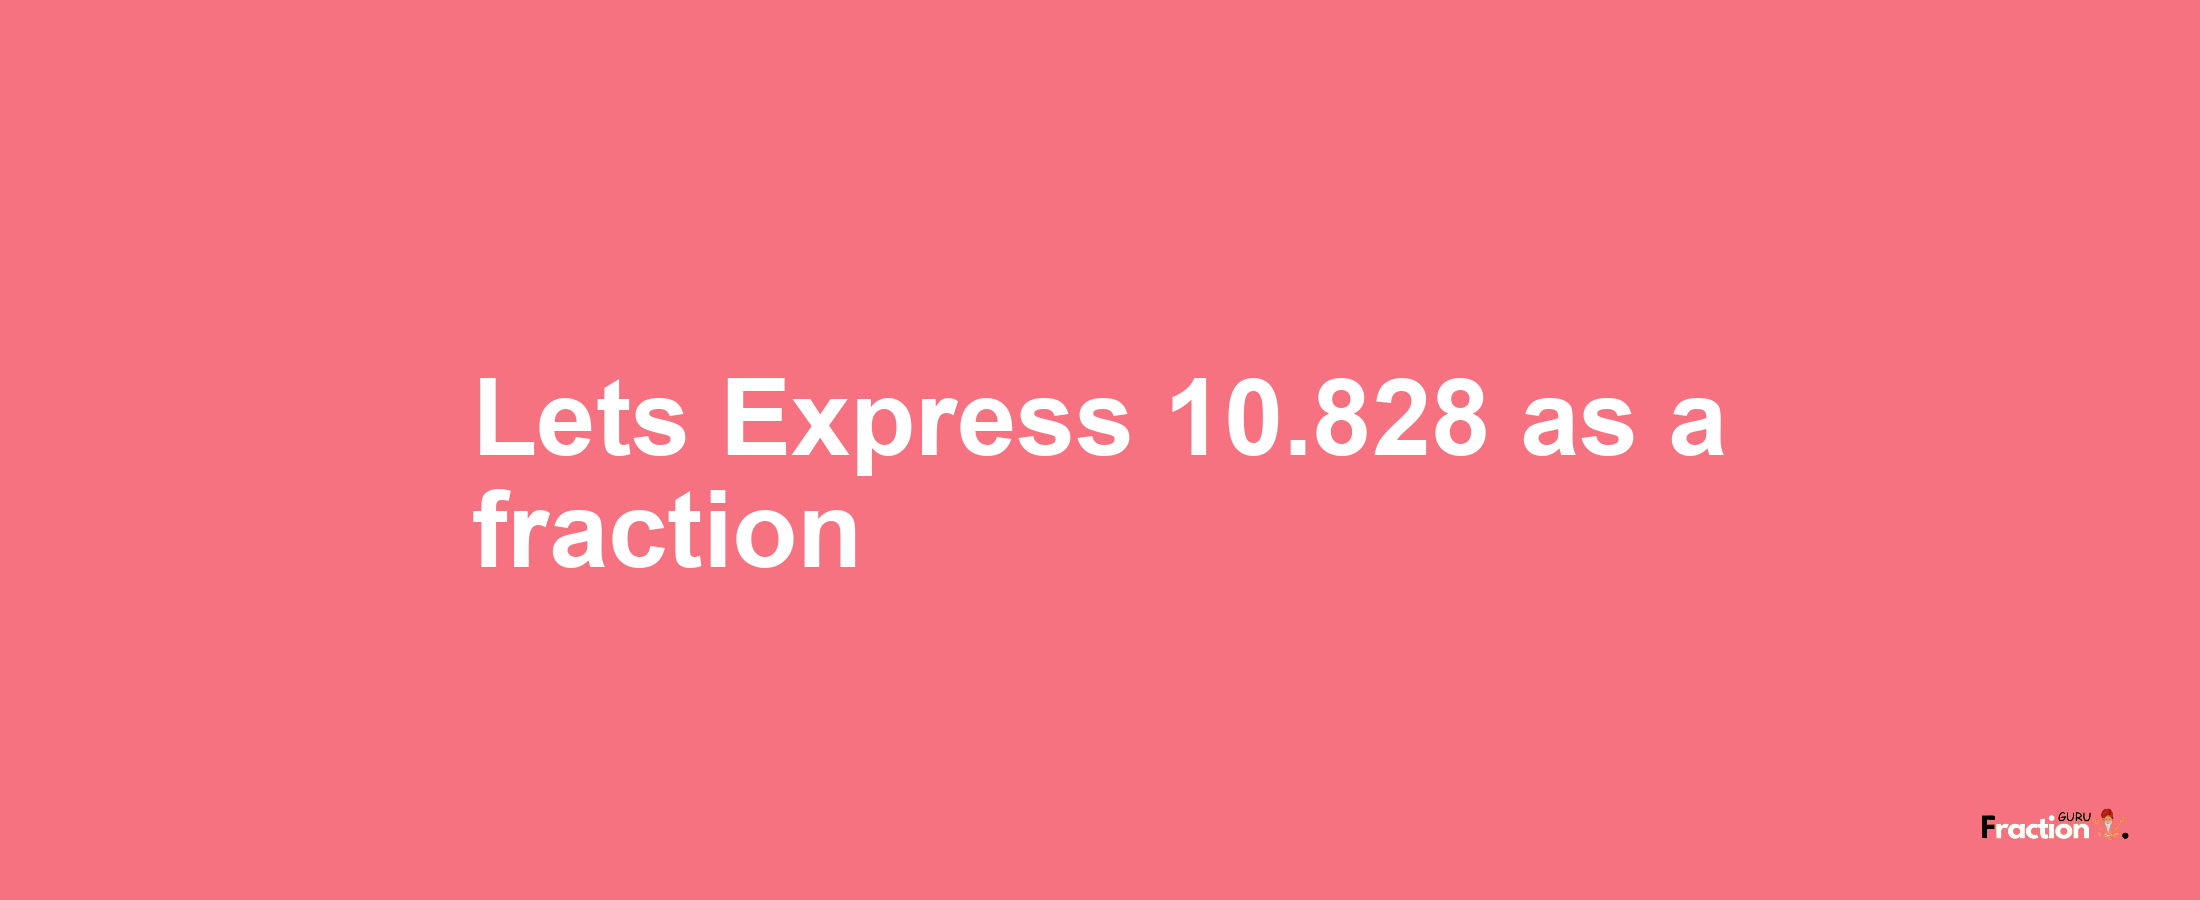 Lets Express 10.828 as afraction